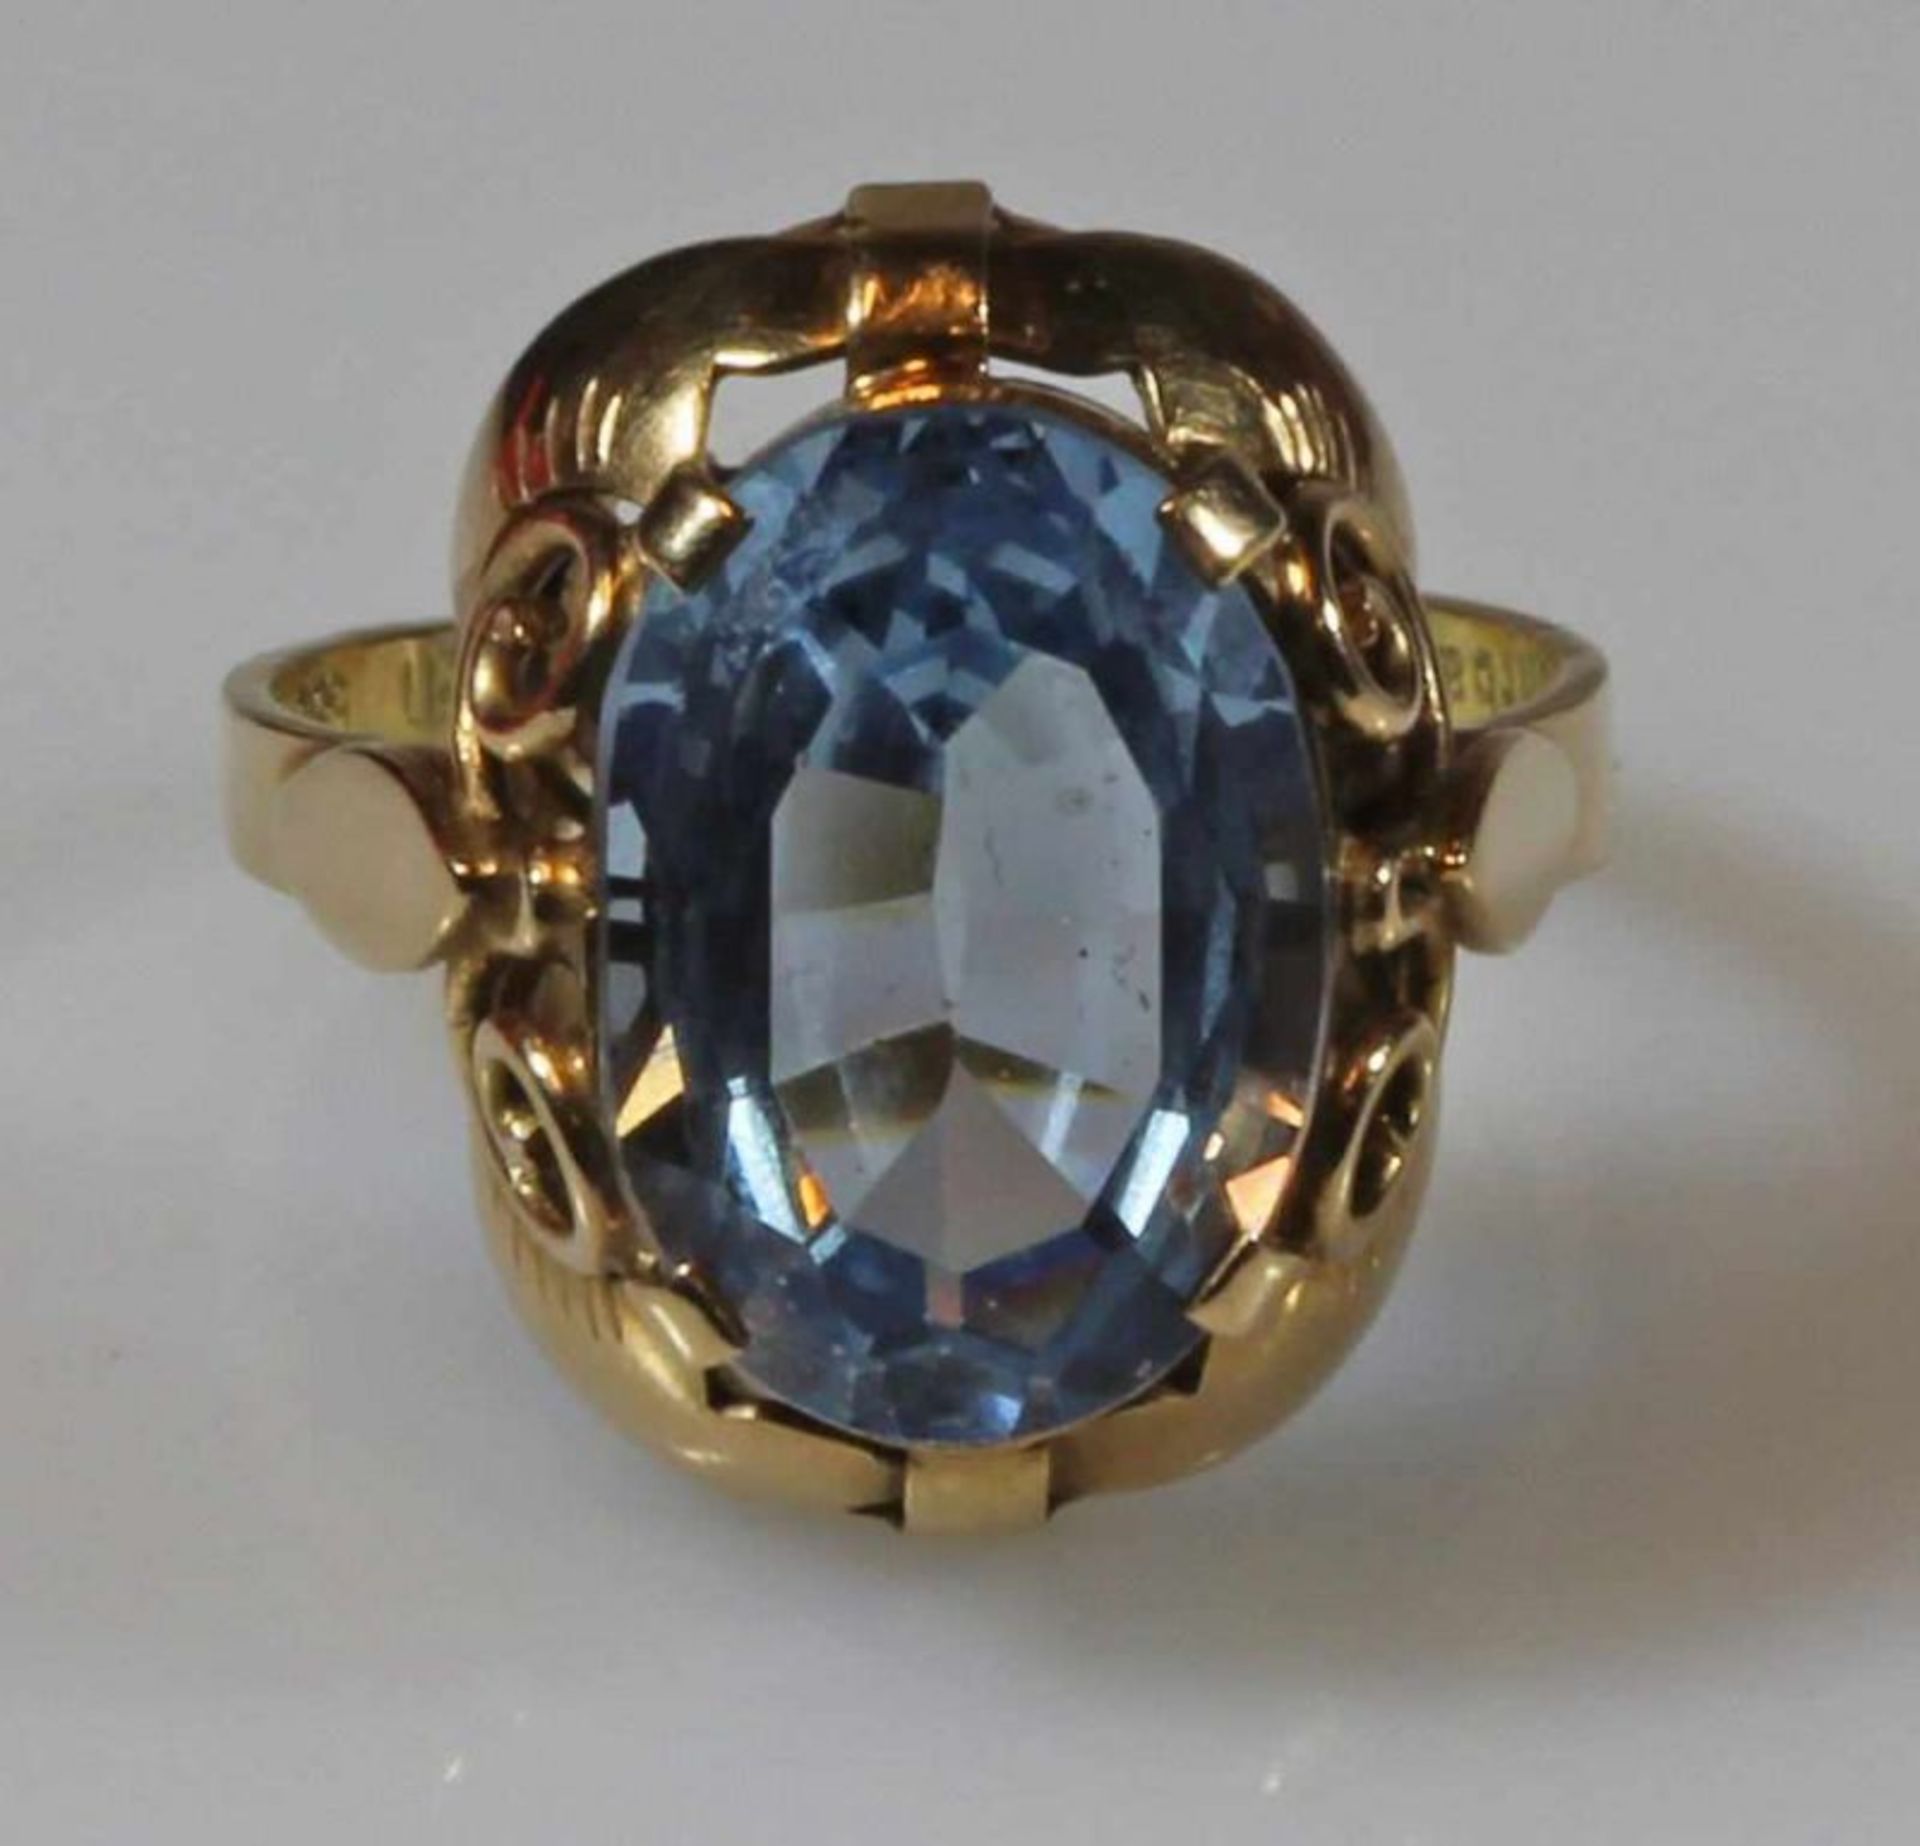 Ring, GG 585, 1 synthetischer Spinell, 4.7 g, RM 17.5 20.00 % buyer's premium on the hammer price